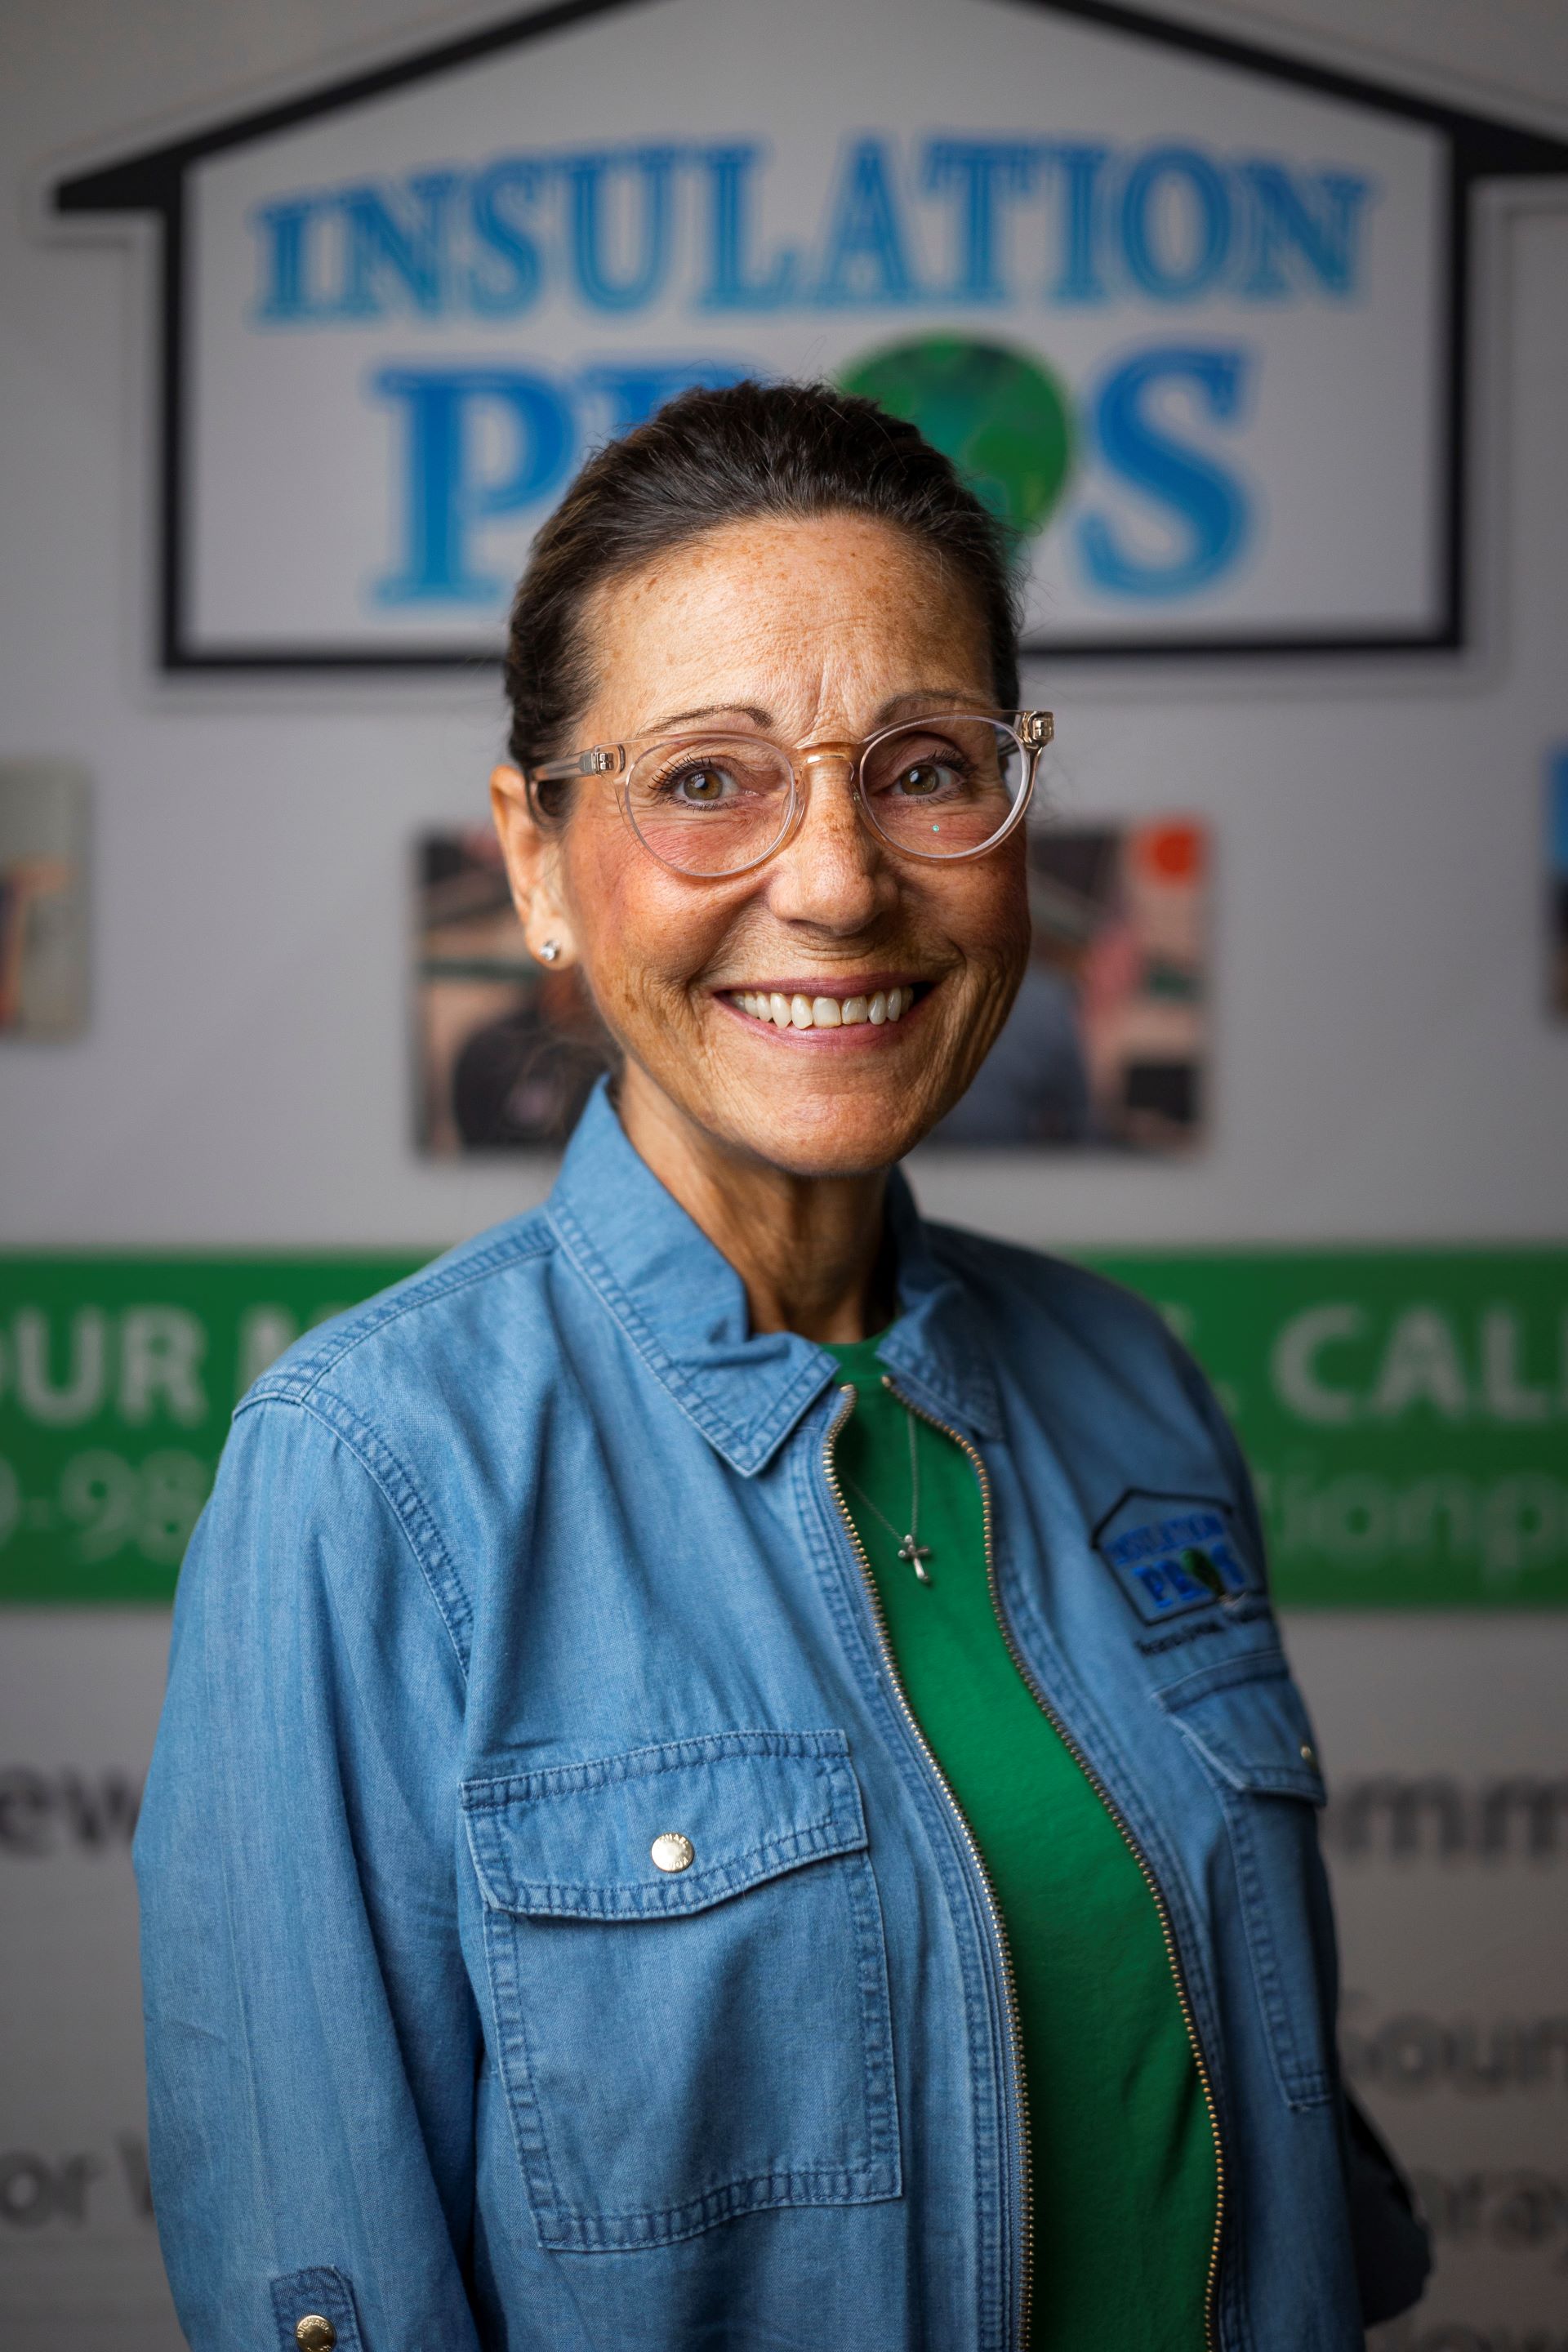 A woman wearing glasses and a denim shirt is smiling in front of a sign for insulation pros.